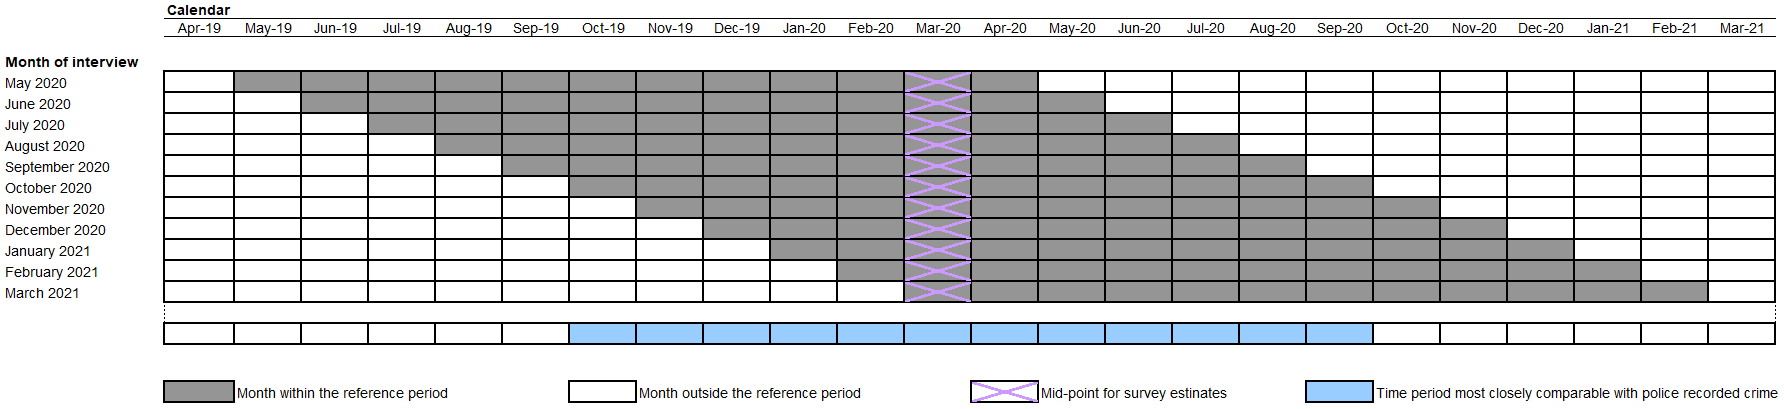 Calendar chart showing the reference periods for Telephone-operated Crime Survey for England and Wales (TCSEW) interviews.